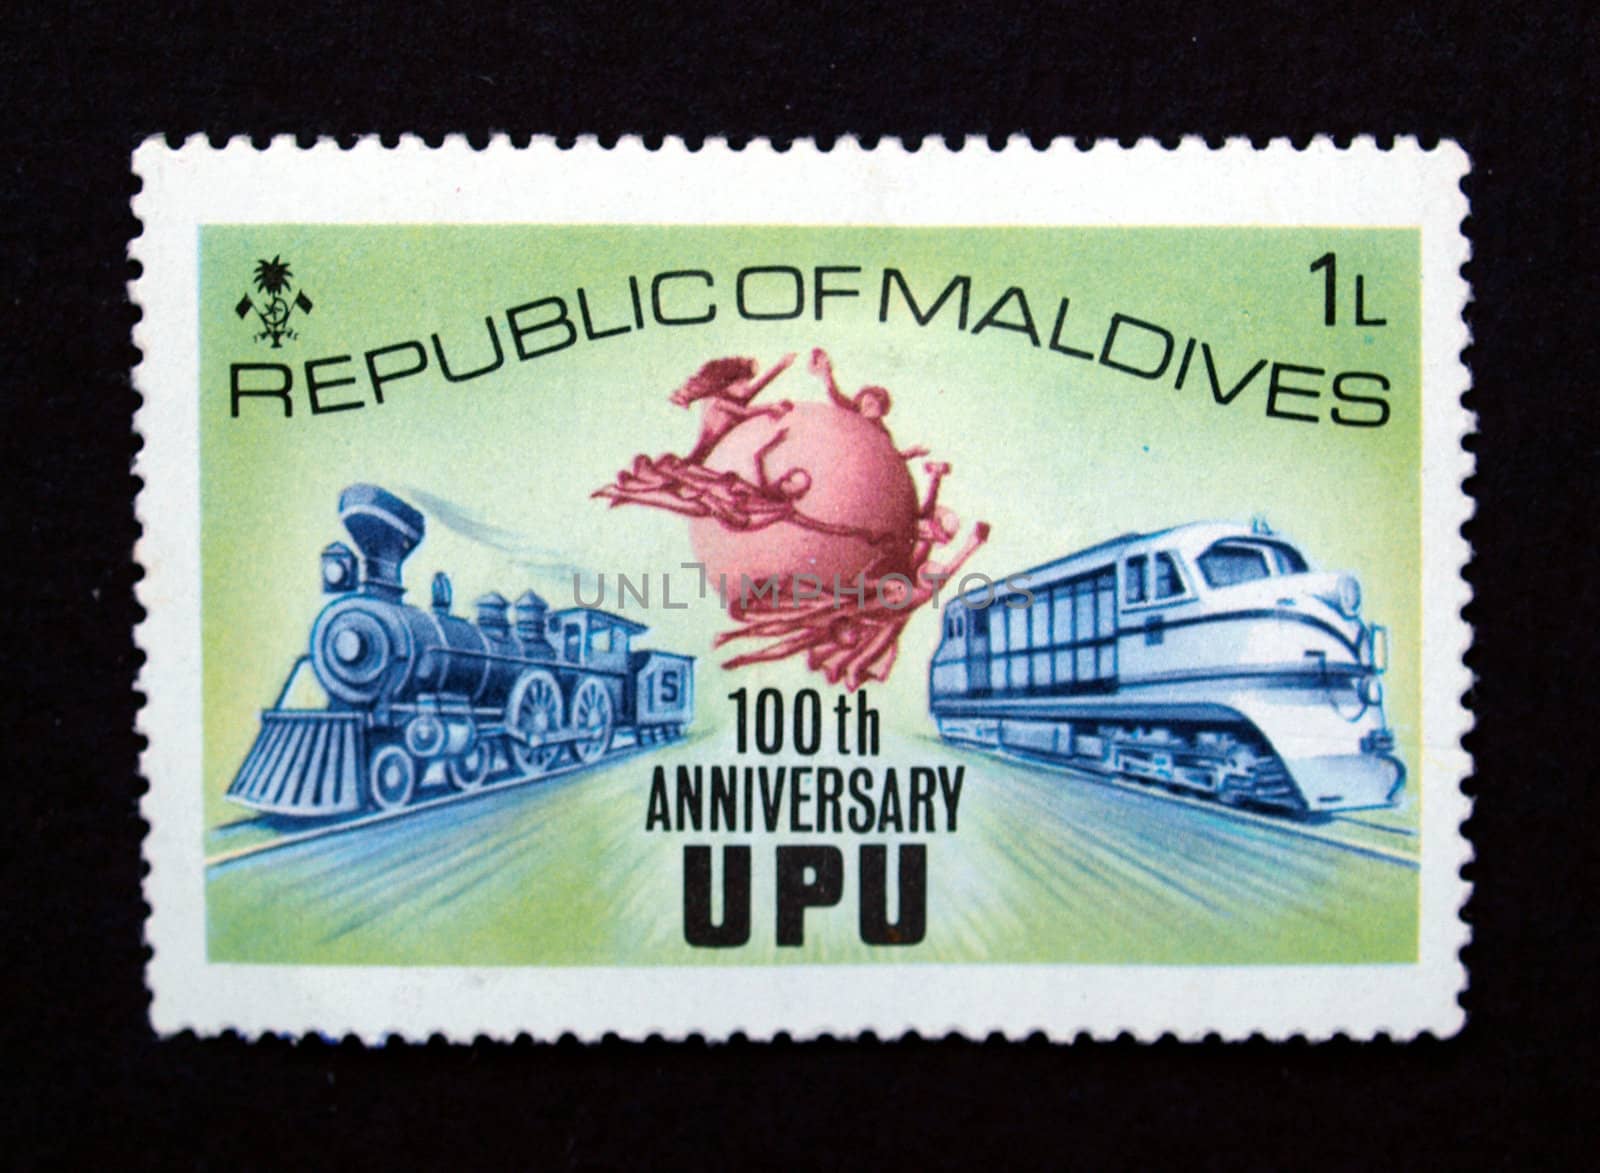 Maldives stamp with train by paolo77